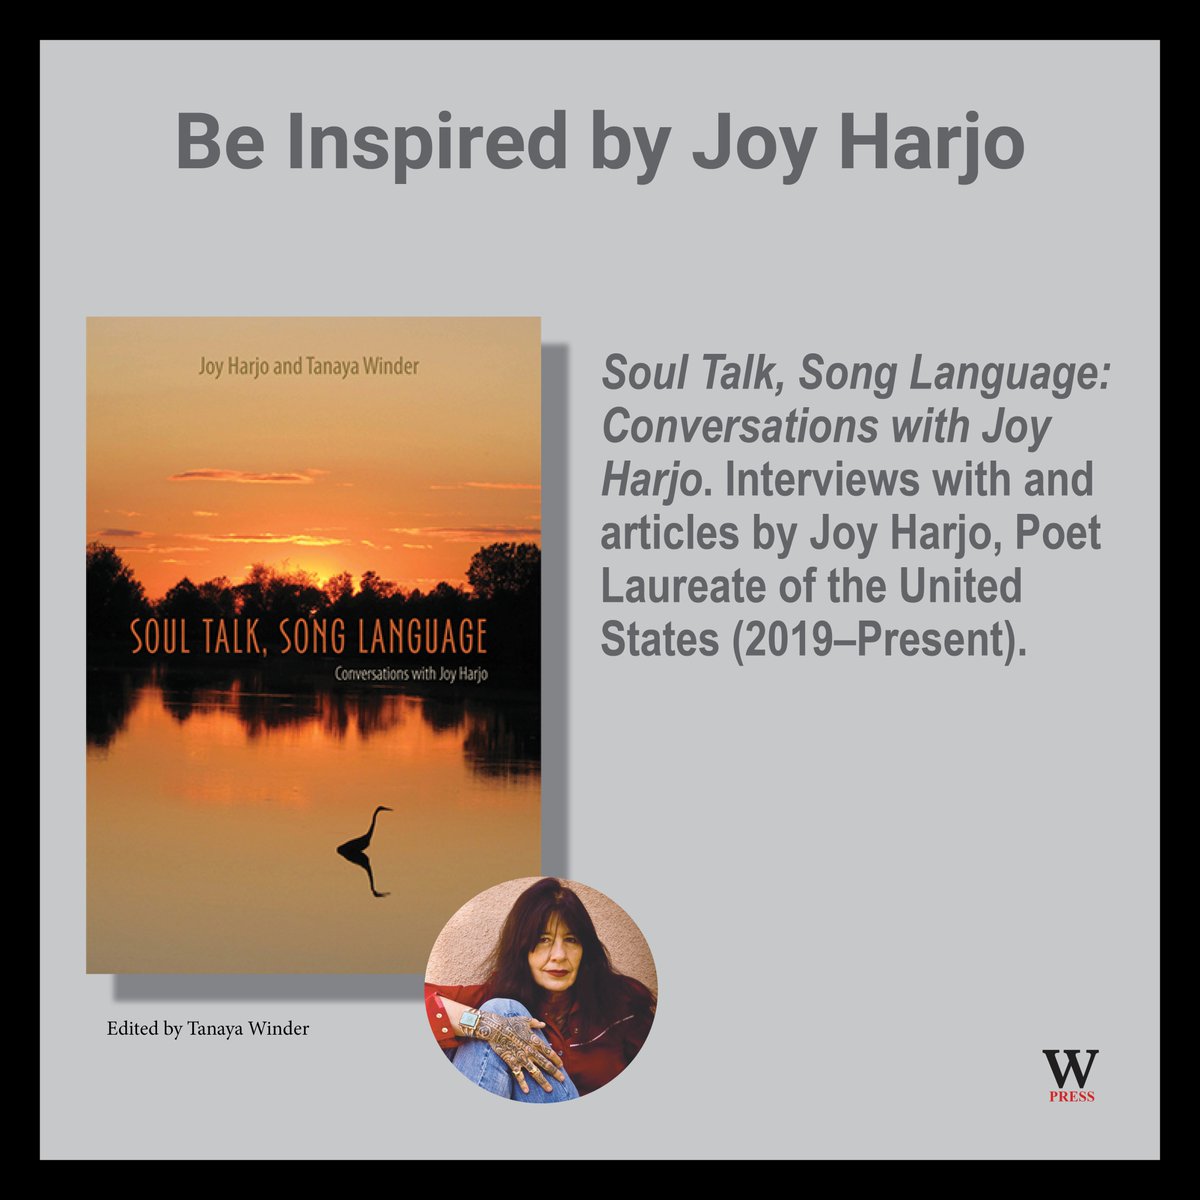 test Twitter Media - 'Soul Talk' With Joy Harjo, an interview by Michael Judge  @MJUDGE_TFP  talking about poetry, ancestral memory, and language. https://t.co/MIHwymBGYn 

Read more conversations with Joy Harjo in “Soul Talk, Song Language." Use discount code Q301 for 30% off
https://t.co/sDfuwElqPi https://t.co/z5SPev12Vm